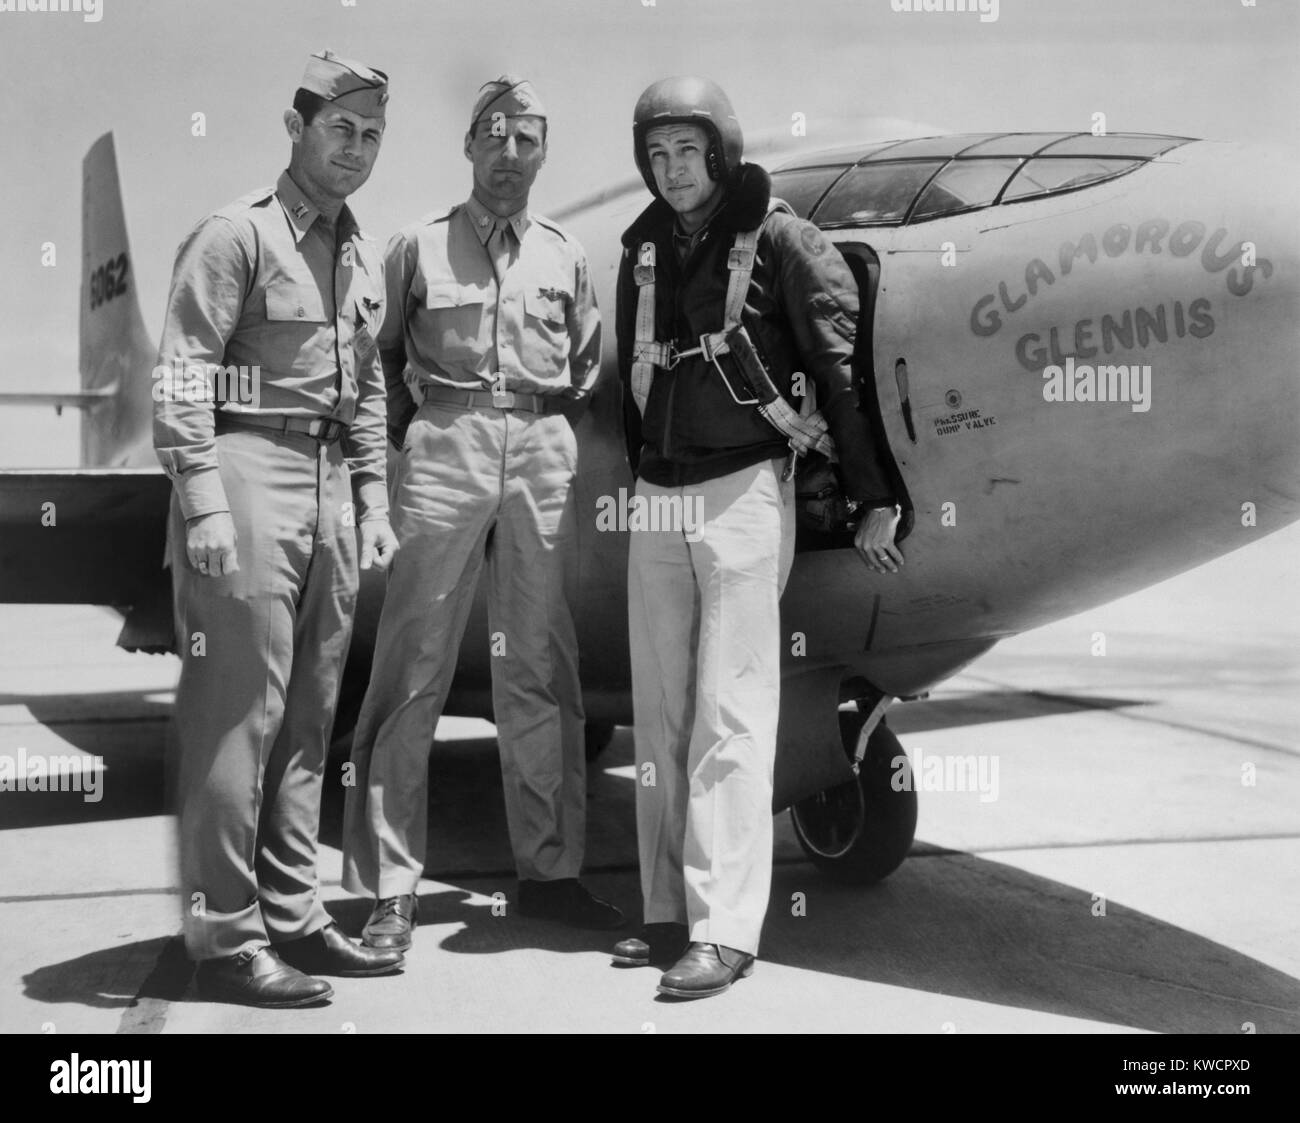 Test Pilots Capt. Charles E. Yeager, Major Gus Lundquist, and Capt. James Fitzgerald. They flew the supersonic Bell XS-1 rocket plane named 'Glamorous Glennis'. Edwards Air Force Base ca. 1947-48. - (BSLOC 2015 1 37) Stock Photo